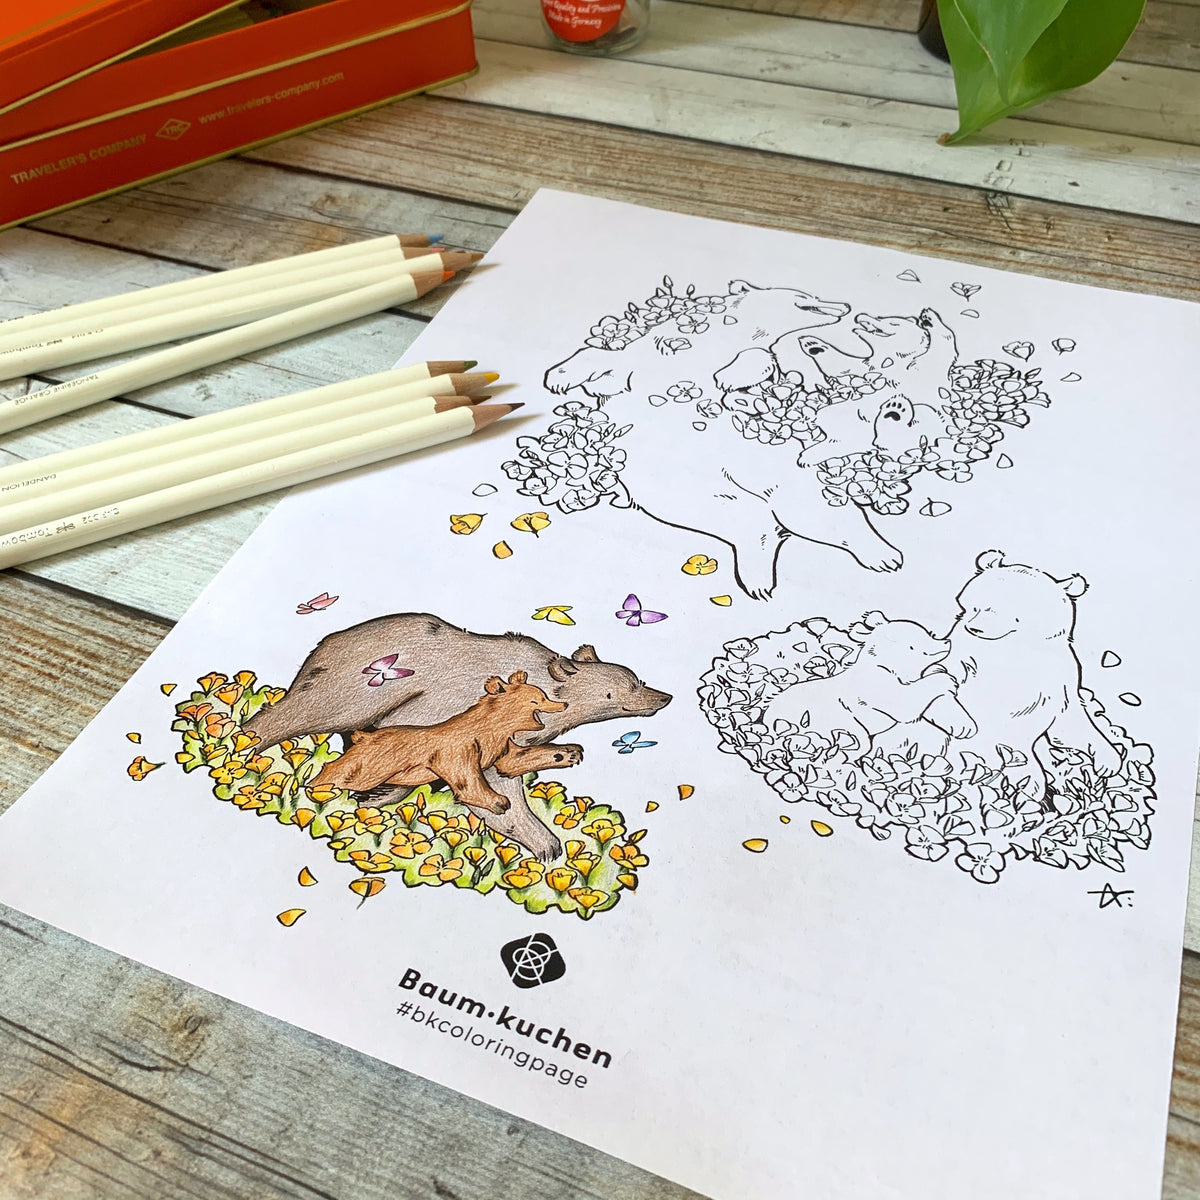 [BK Original Coloring Page] California Poppy and Bear (PDF Download)